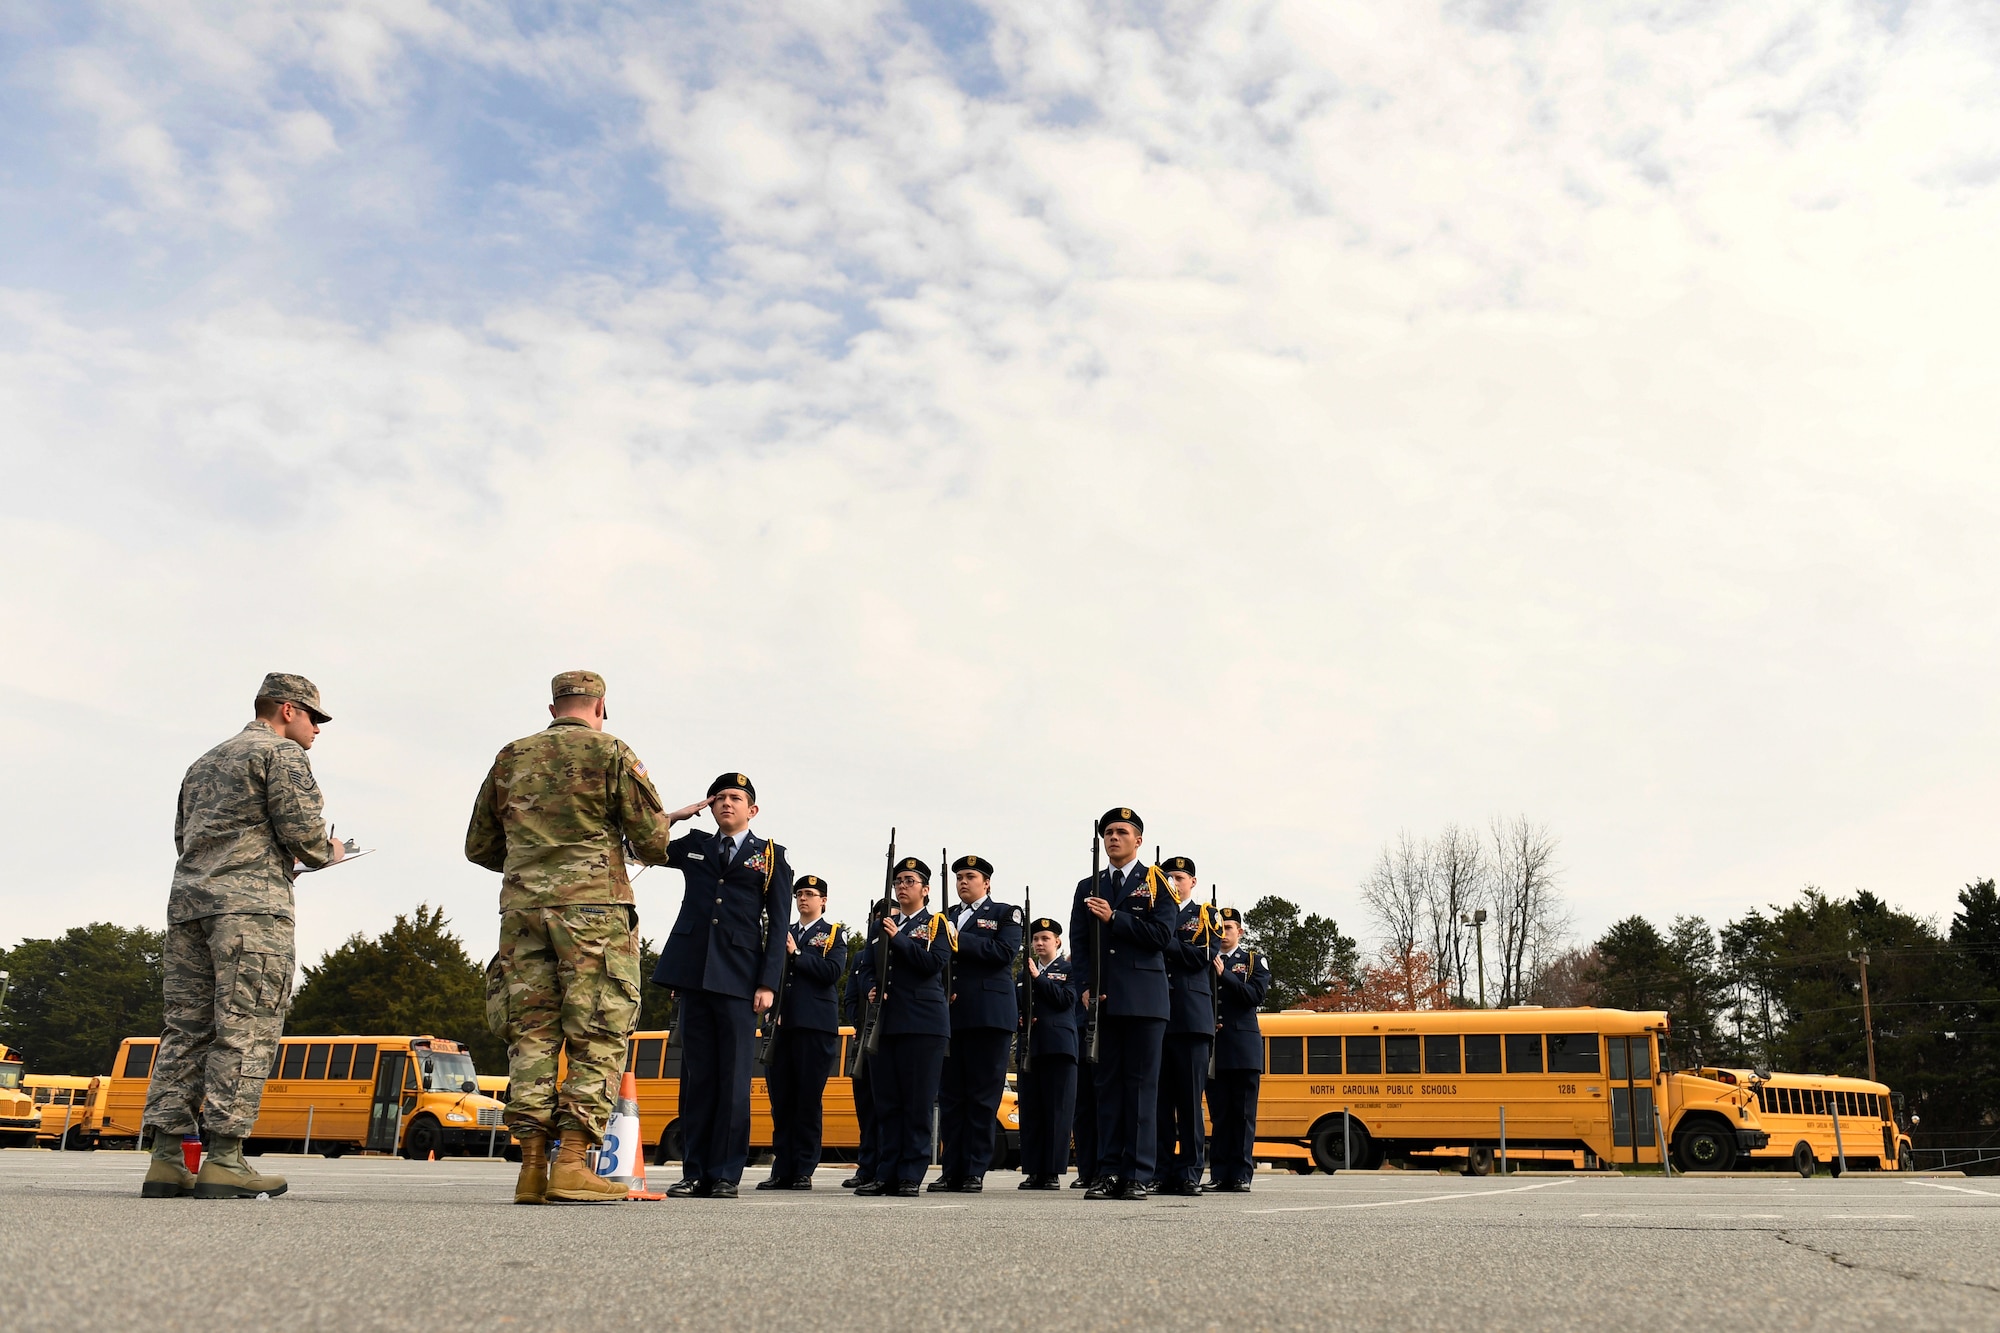 U.S. Air Force Junior Reserve Officers' Training Corps cadets from Lincolnton High School compete in the armed flight drill during the Patriot Classic Drill Competition held at Independence High School, Charlotte, N.C., March 10, 2018. Over 300 students from 14 high schools traveled from as far as 3 hours away to compete and were judged by volunteers from the North Carolina Air National Guard and Army National Guard.